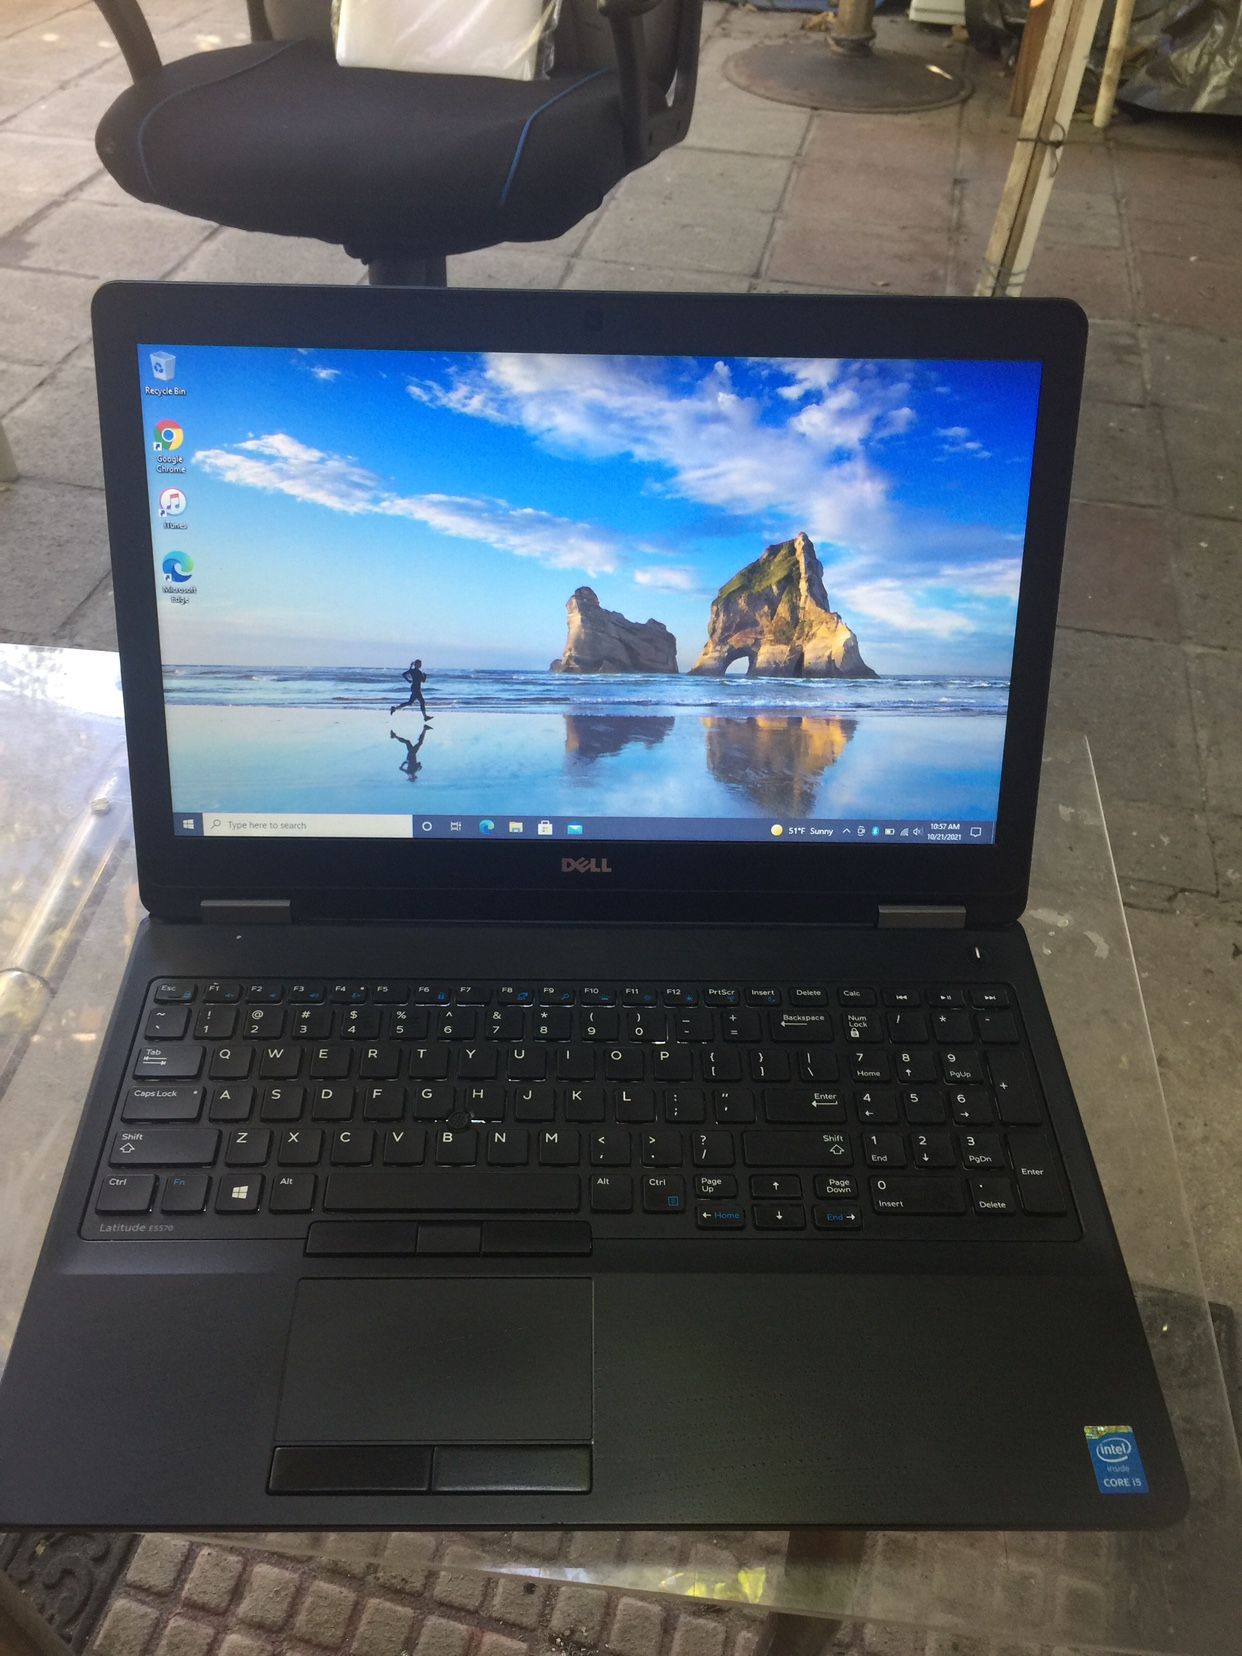 15.6” Dell Latitude 5570 i5 Processor 6th Gen 128gb SSD 4gb Ram Come With Charger Light Up Keyboard 